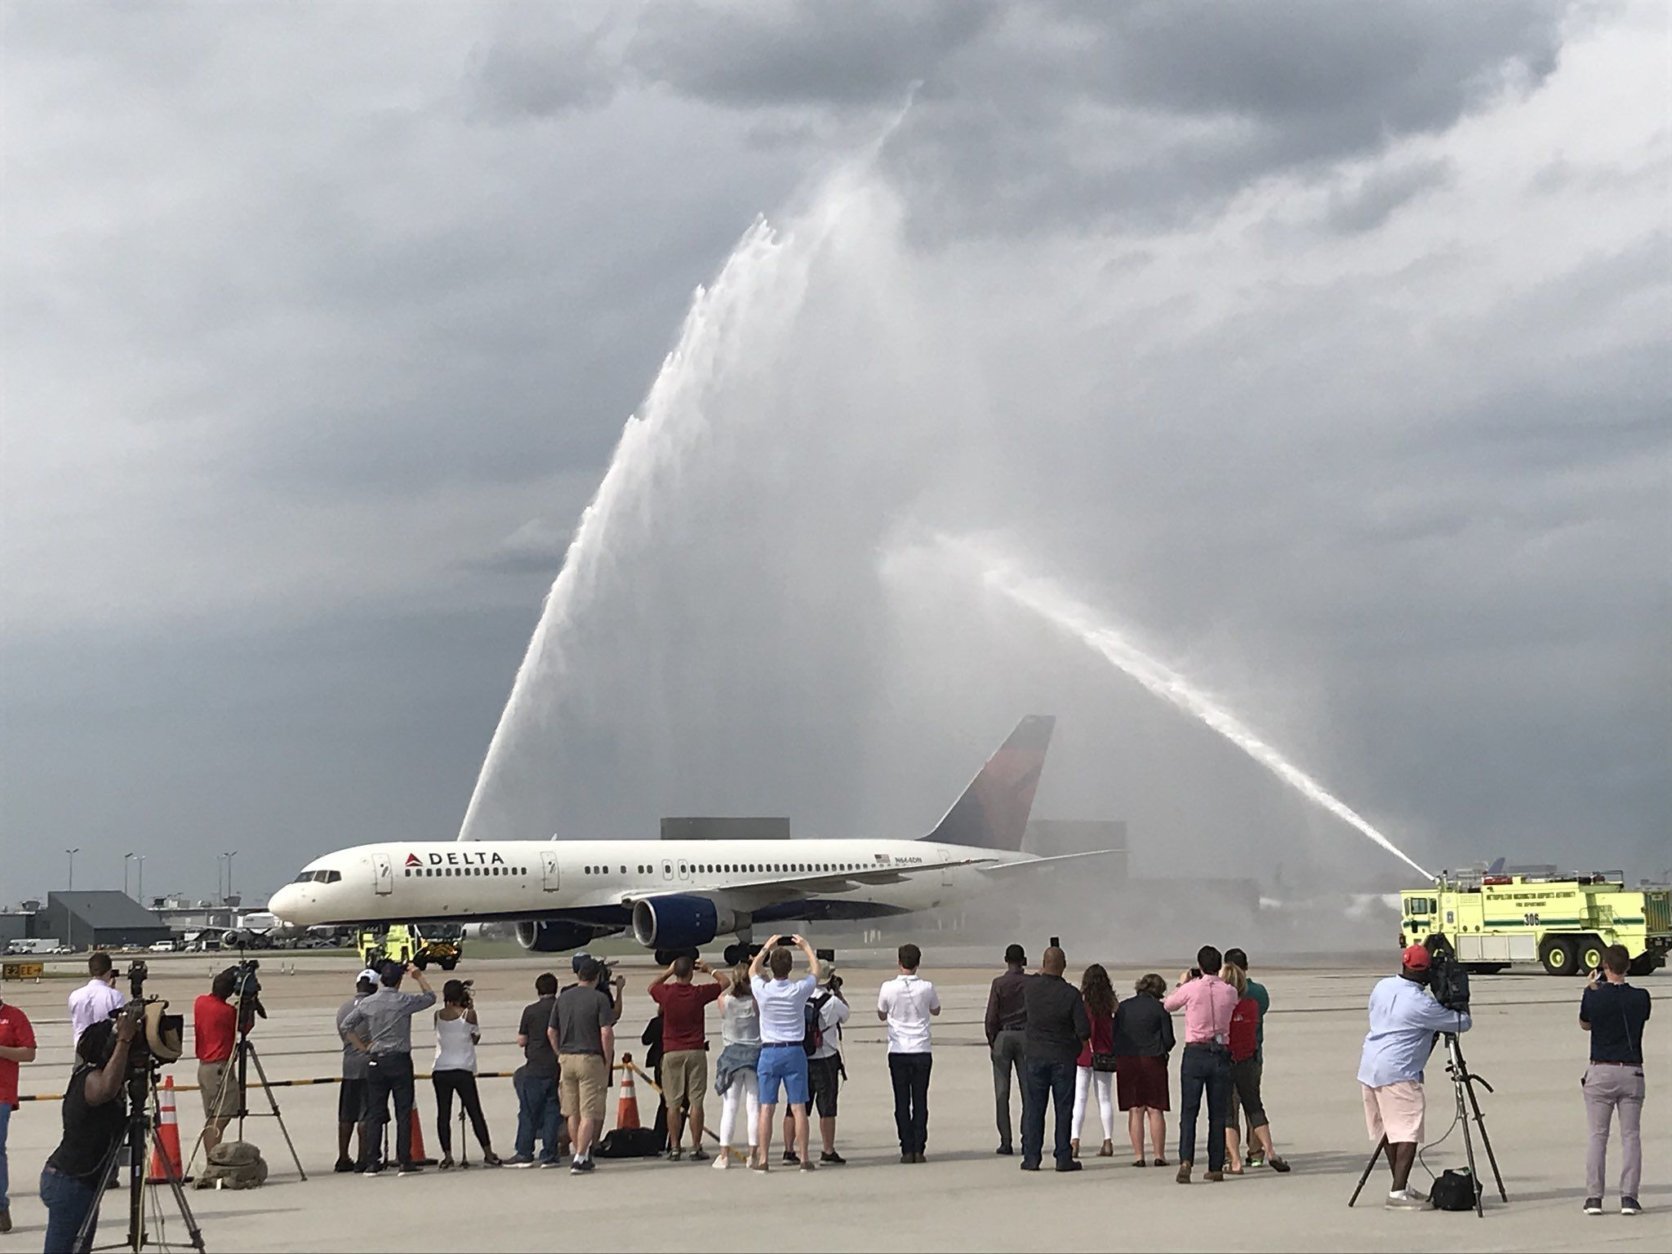 Washington Airports Authority fire trucks welcome the Caps flight back from Vegas Friday afternoon at Dulles International Airport. (WTOP/Michelle Basch)